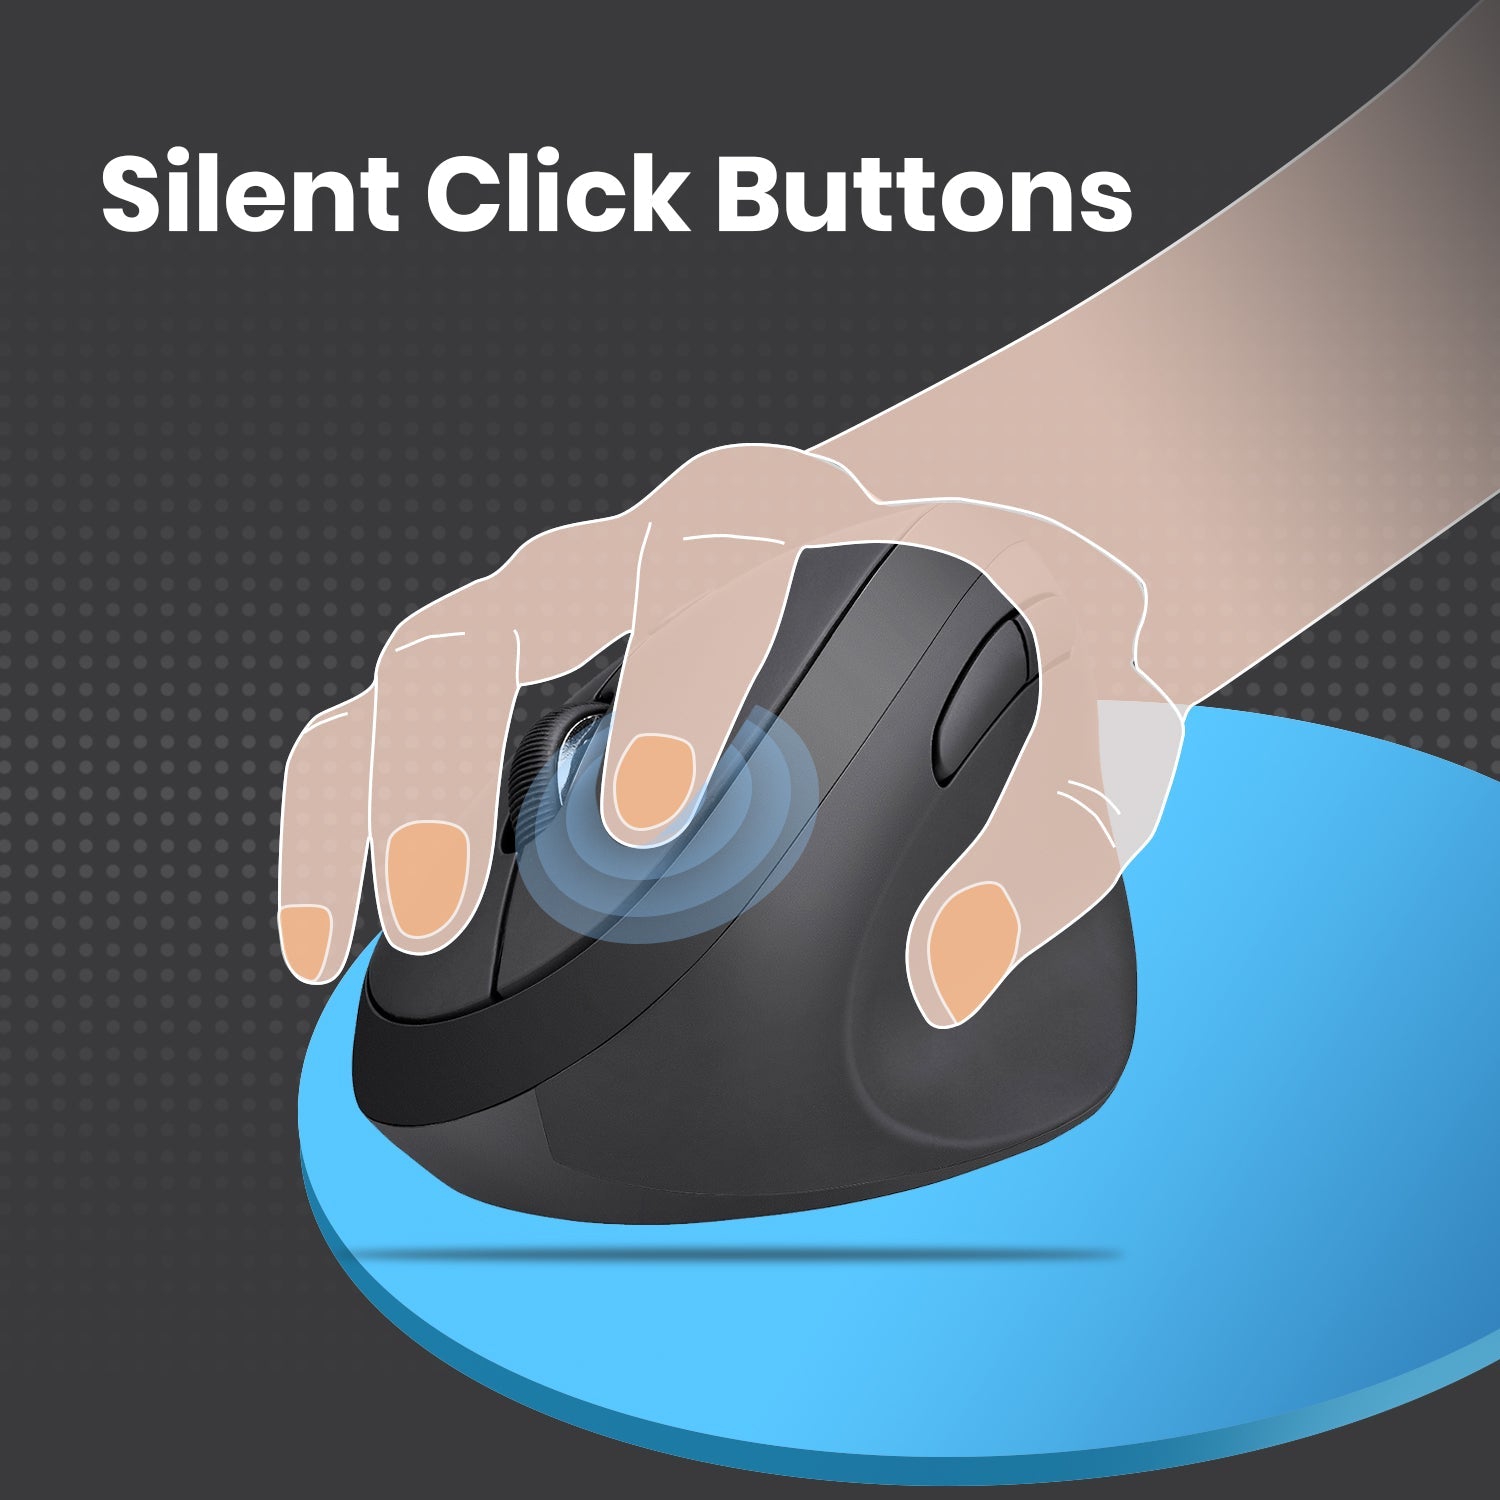 PERIMICE-719 - Wireless Ergonomic Vertical Mouse with Silent Click and Small Design - Perixx Europe